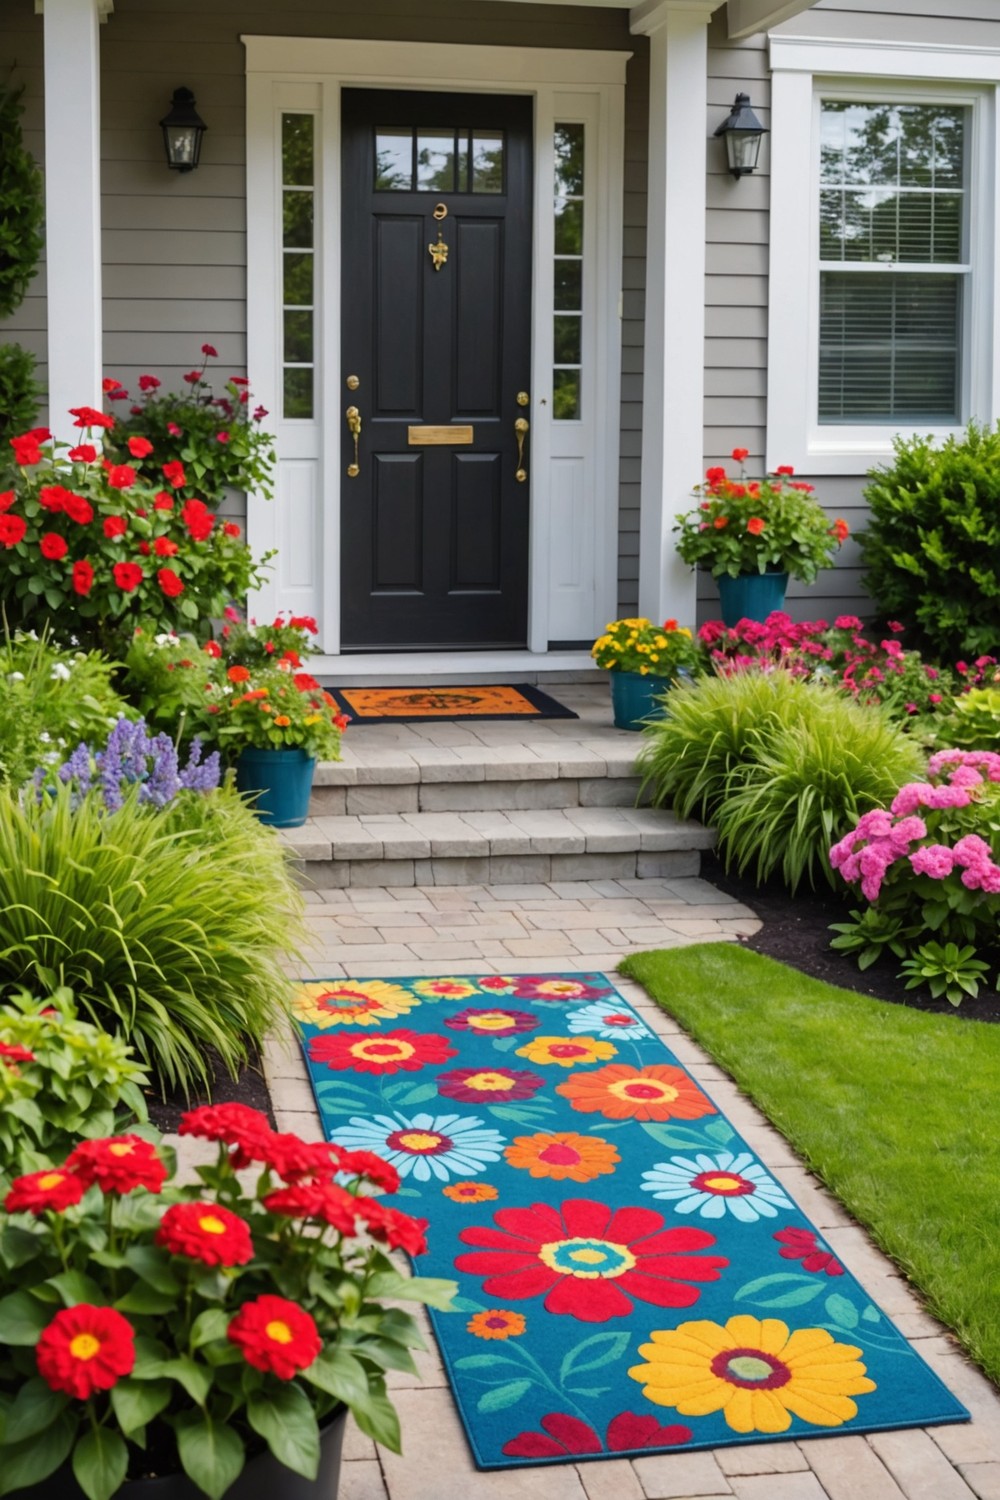 Using Colorful Outdoor Rugs and Doormats to Add Personality